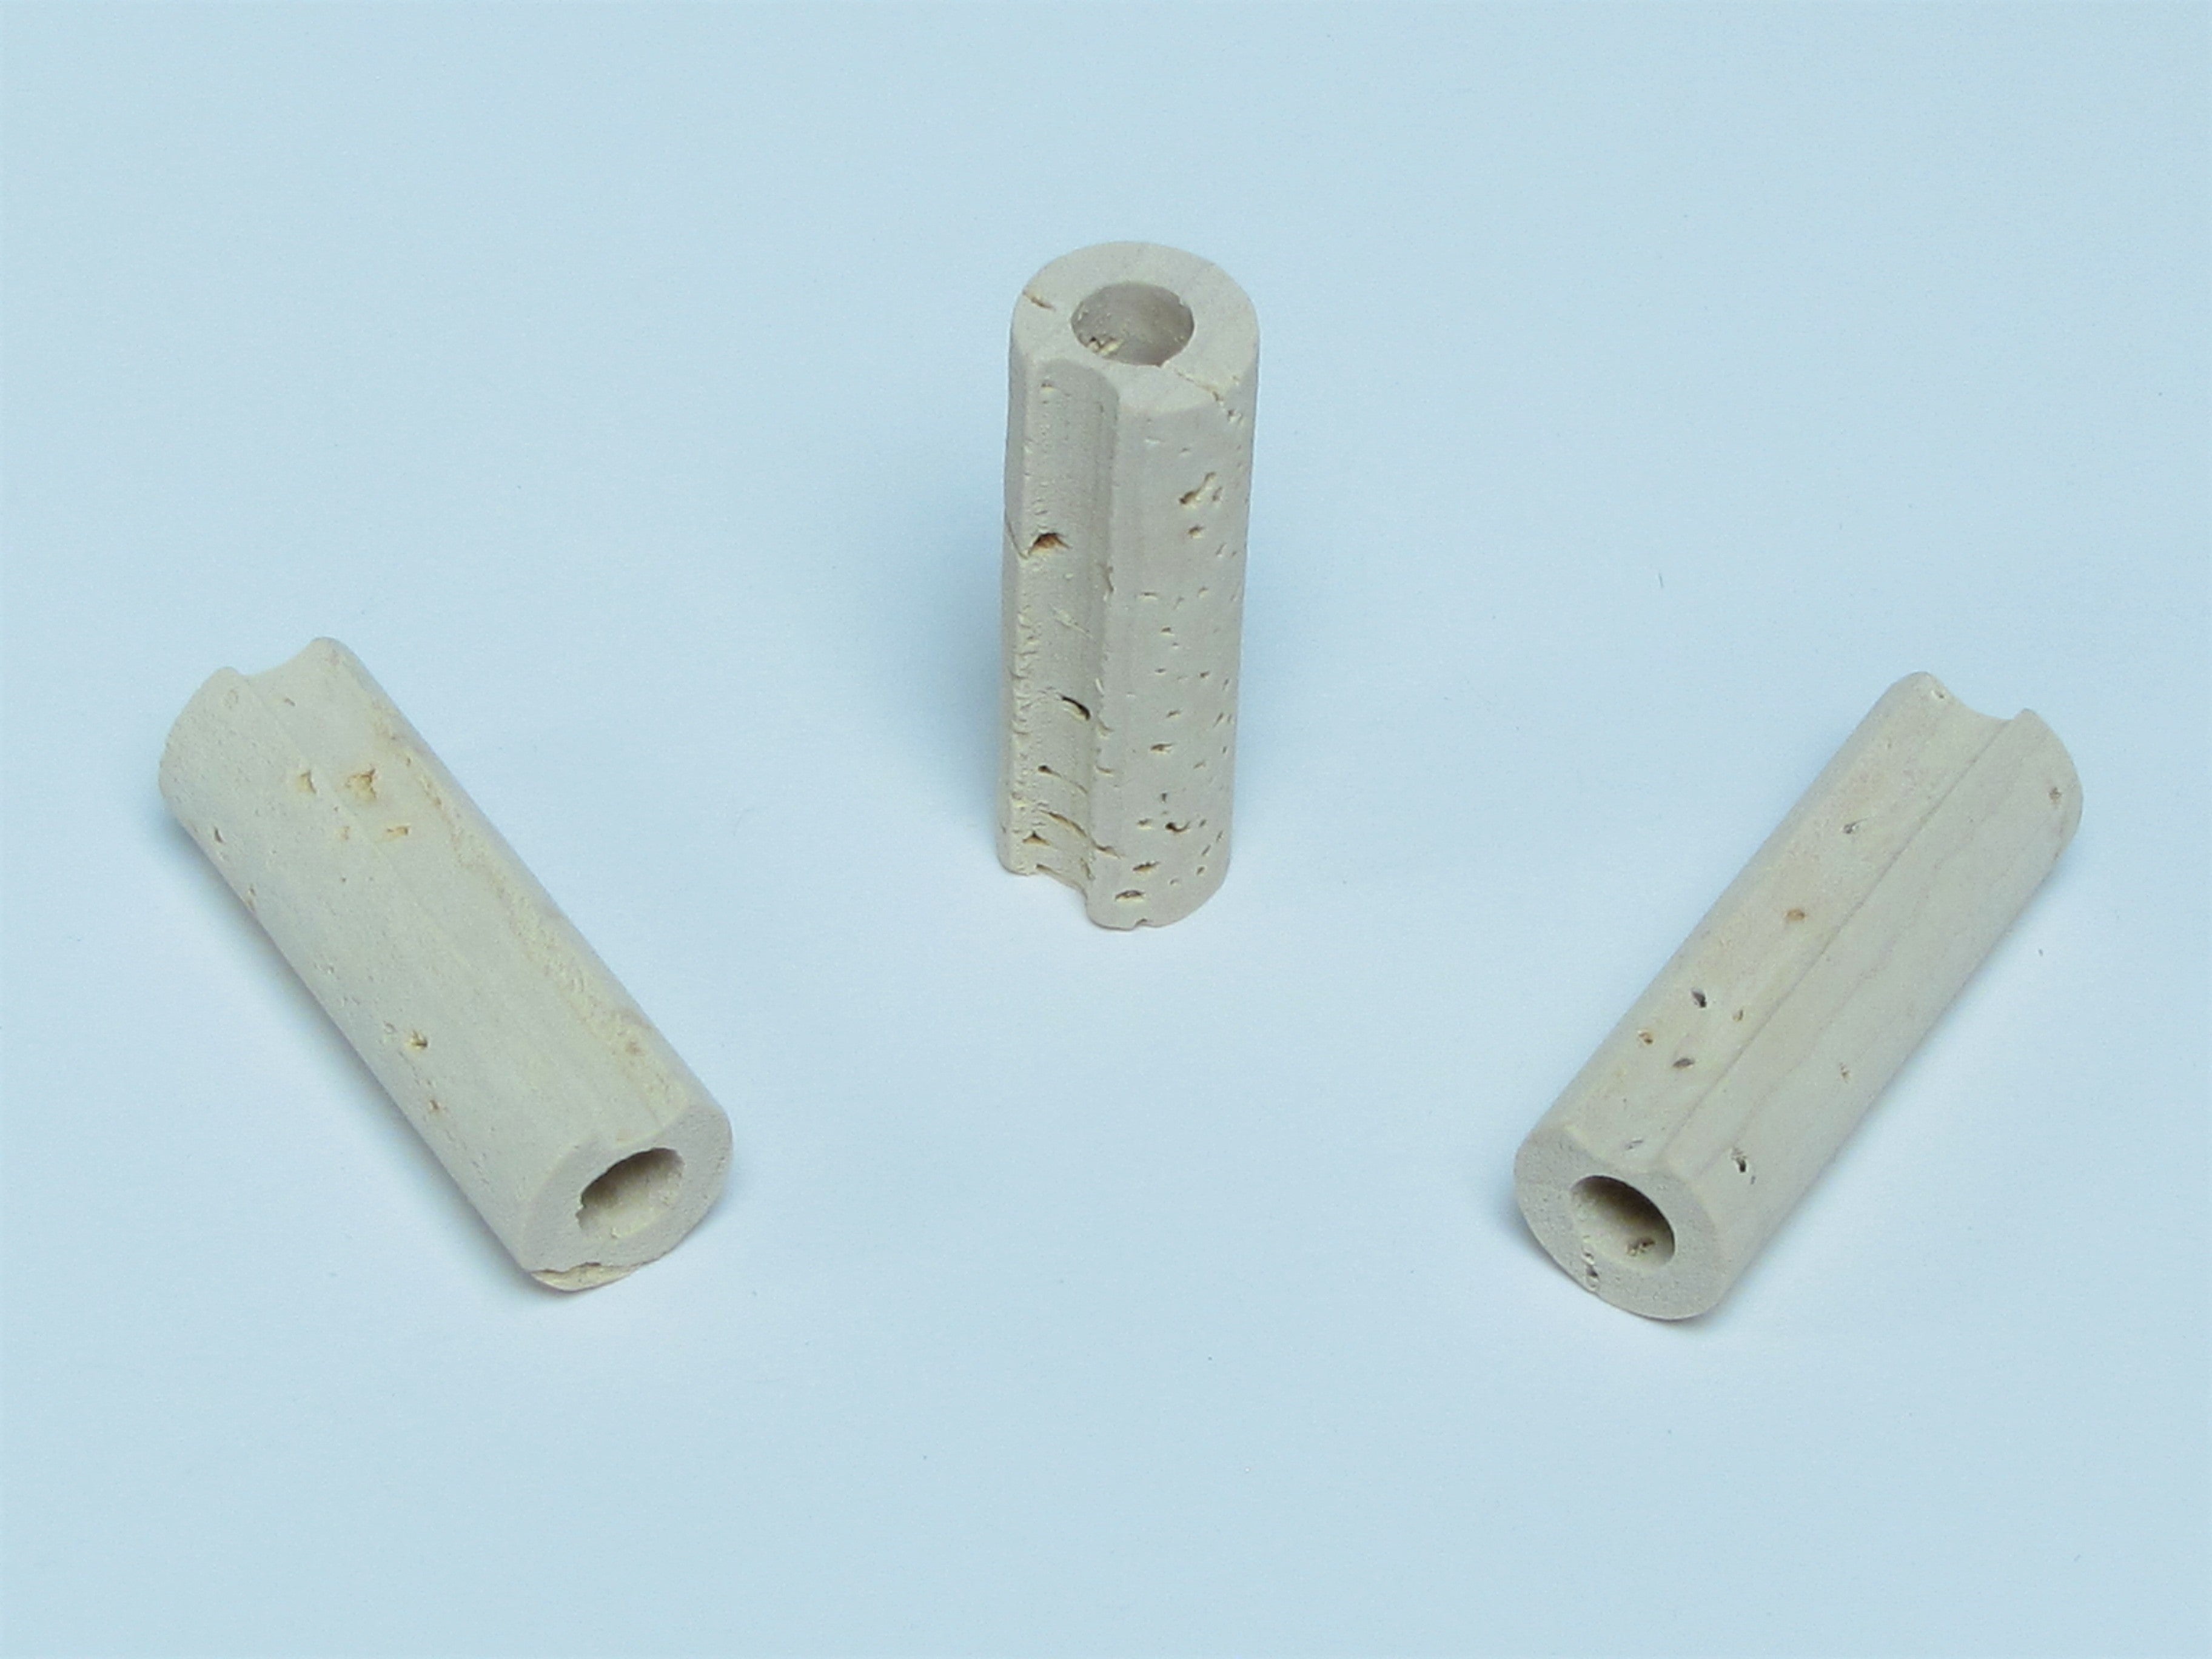 A40 Slotted Tube Corks – Ferree's Tools Inc